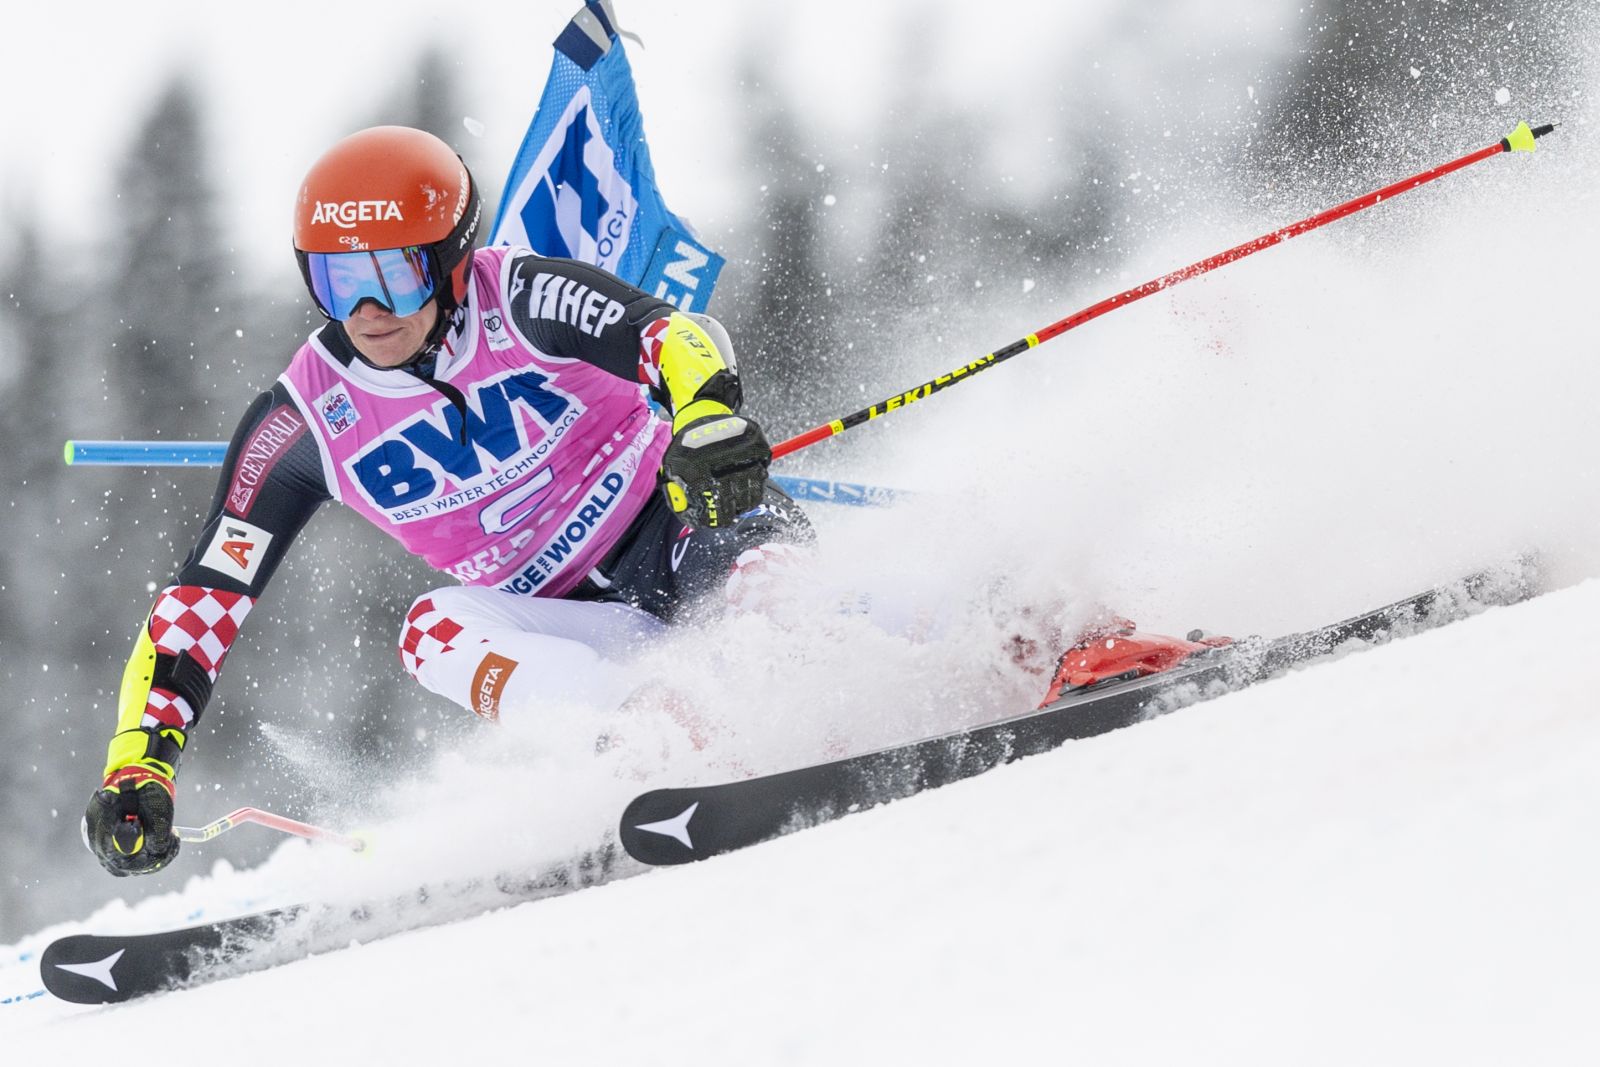 epa09672941 Filip Zubcic of Croatia in action in action during the first run of the men's giant slalom race at the Alpine Skiing FIS Ski World Cup in Adelboden, Switzerland, 08 January 2022.  EPA/ANTHONY ANEX